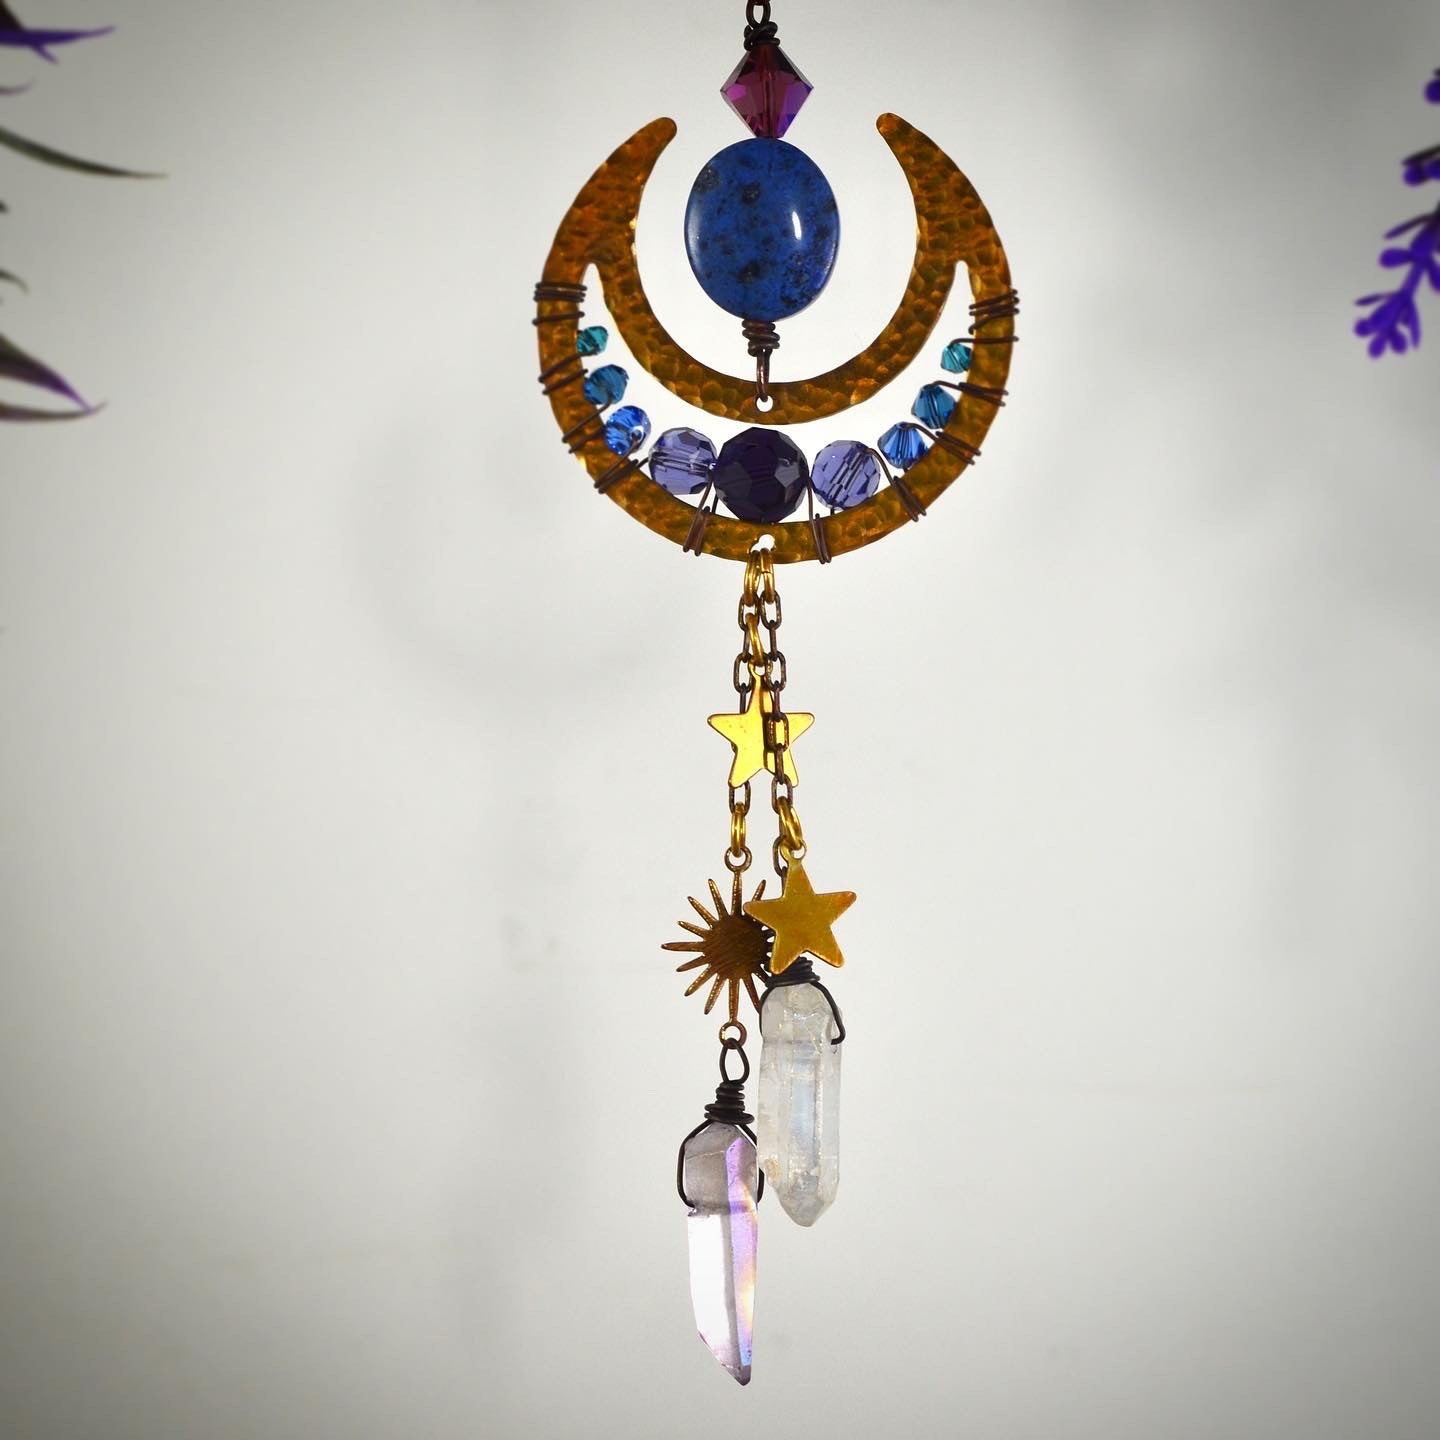 Sun Moon and Stars Rearview Mirror Car Charm, dark witchy decor Crystal prism car accessories